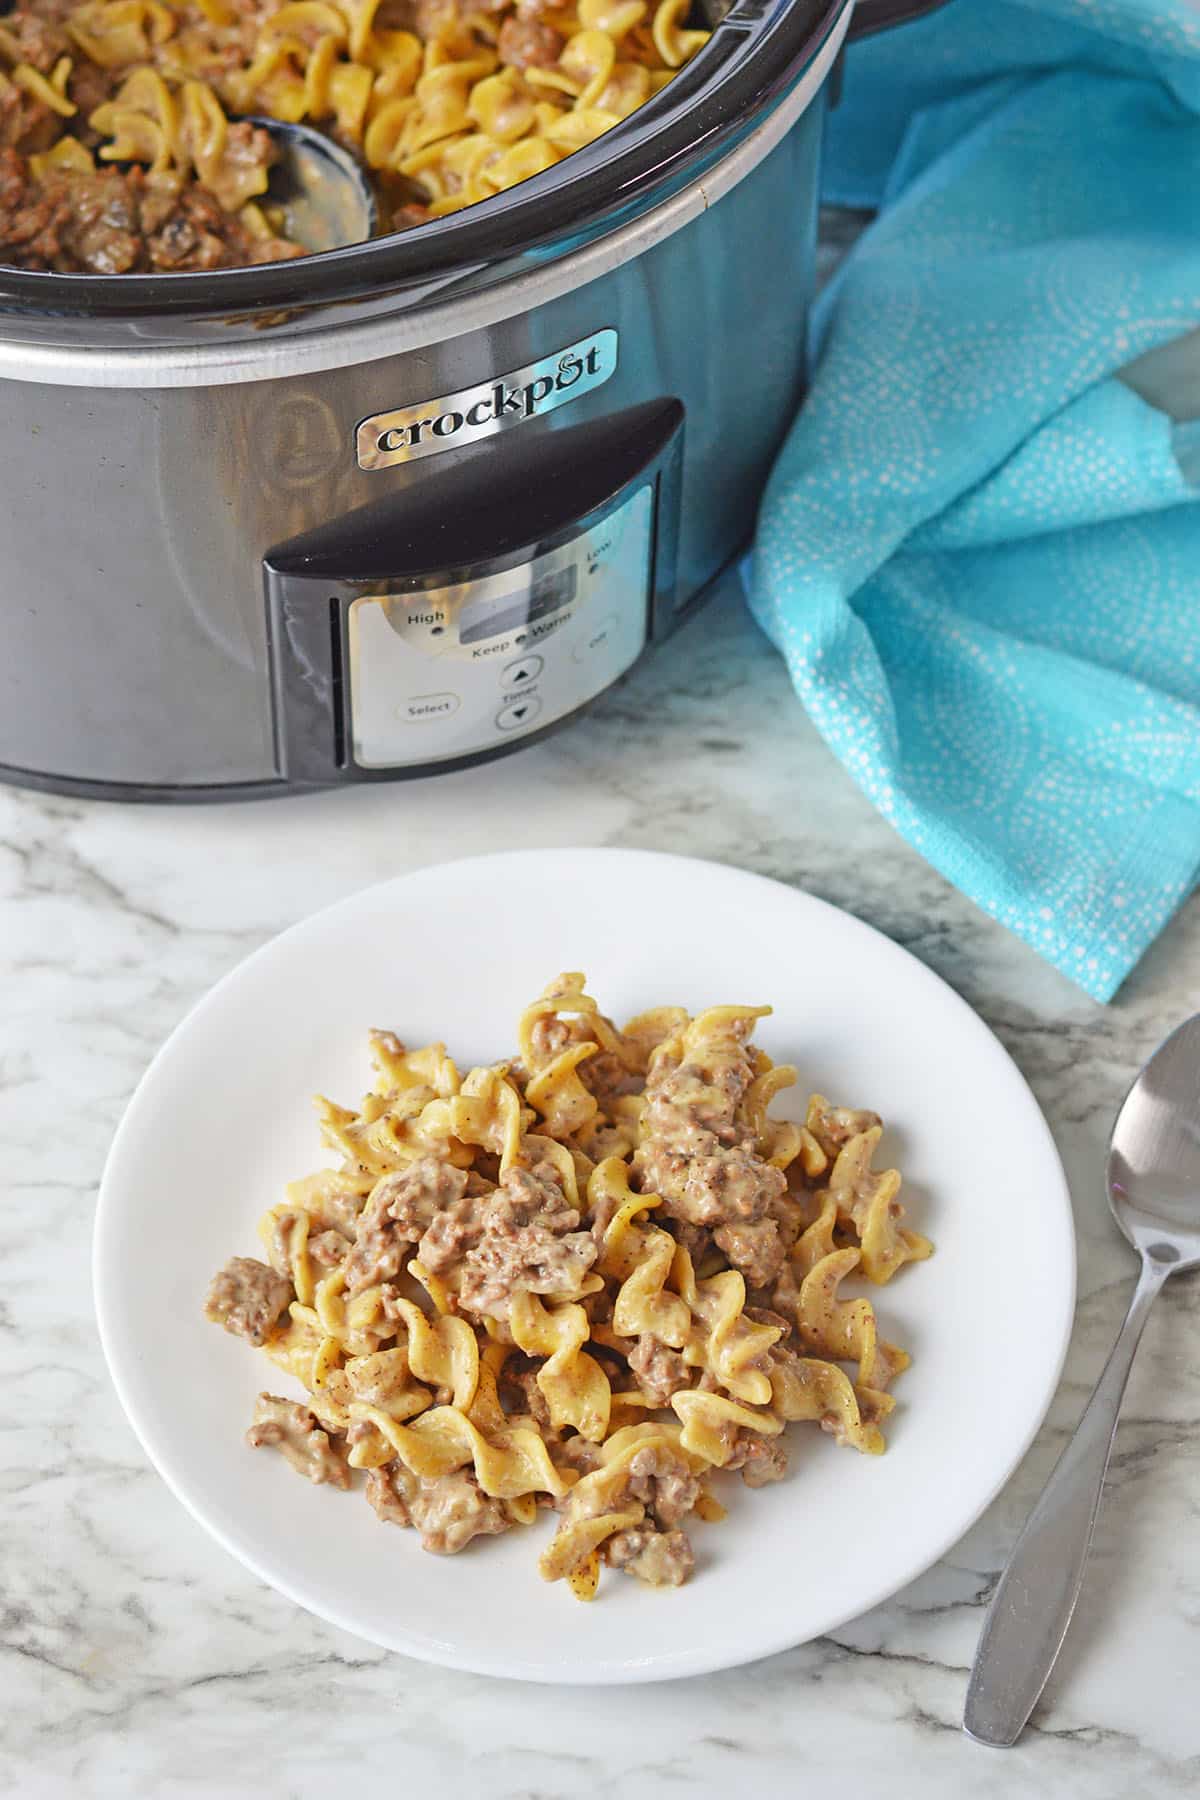 plate with noodles and ground beef with crockpot in background